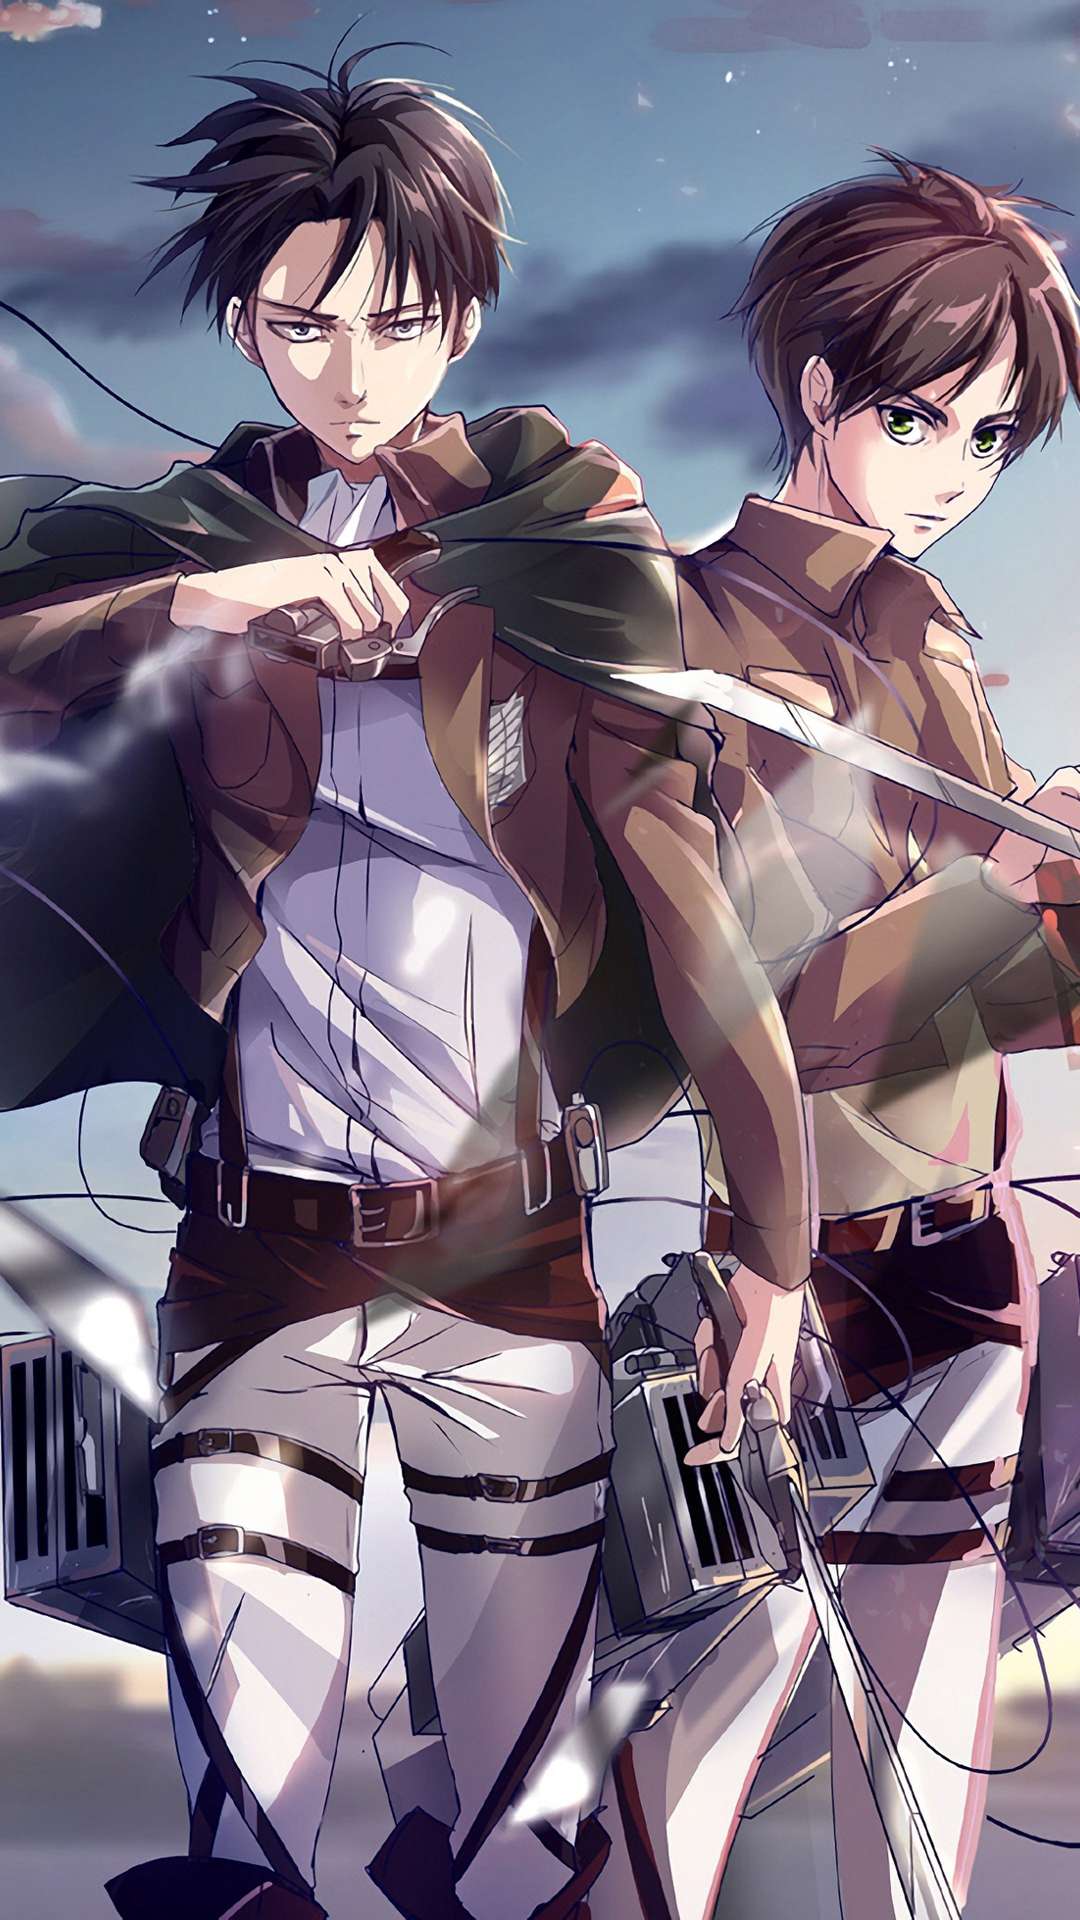 Wallpaper ID 358766  Anime Attack On Titan Phone Wallpaper Eren Yeager  1080x2340 free download